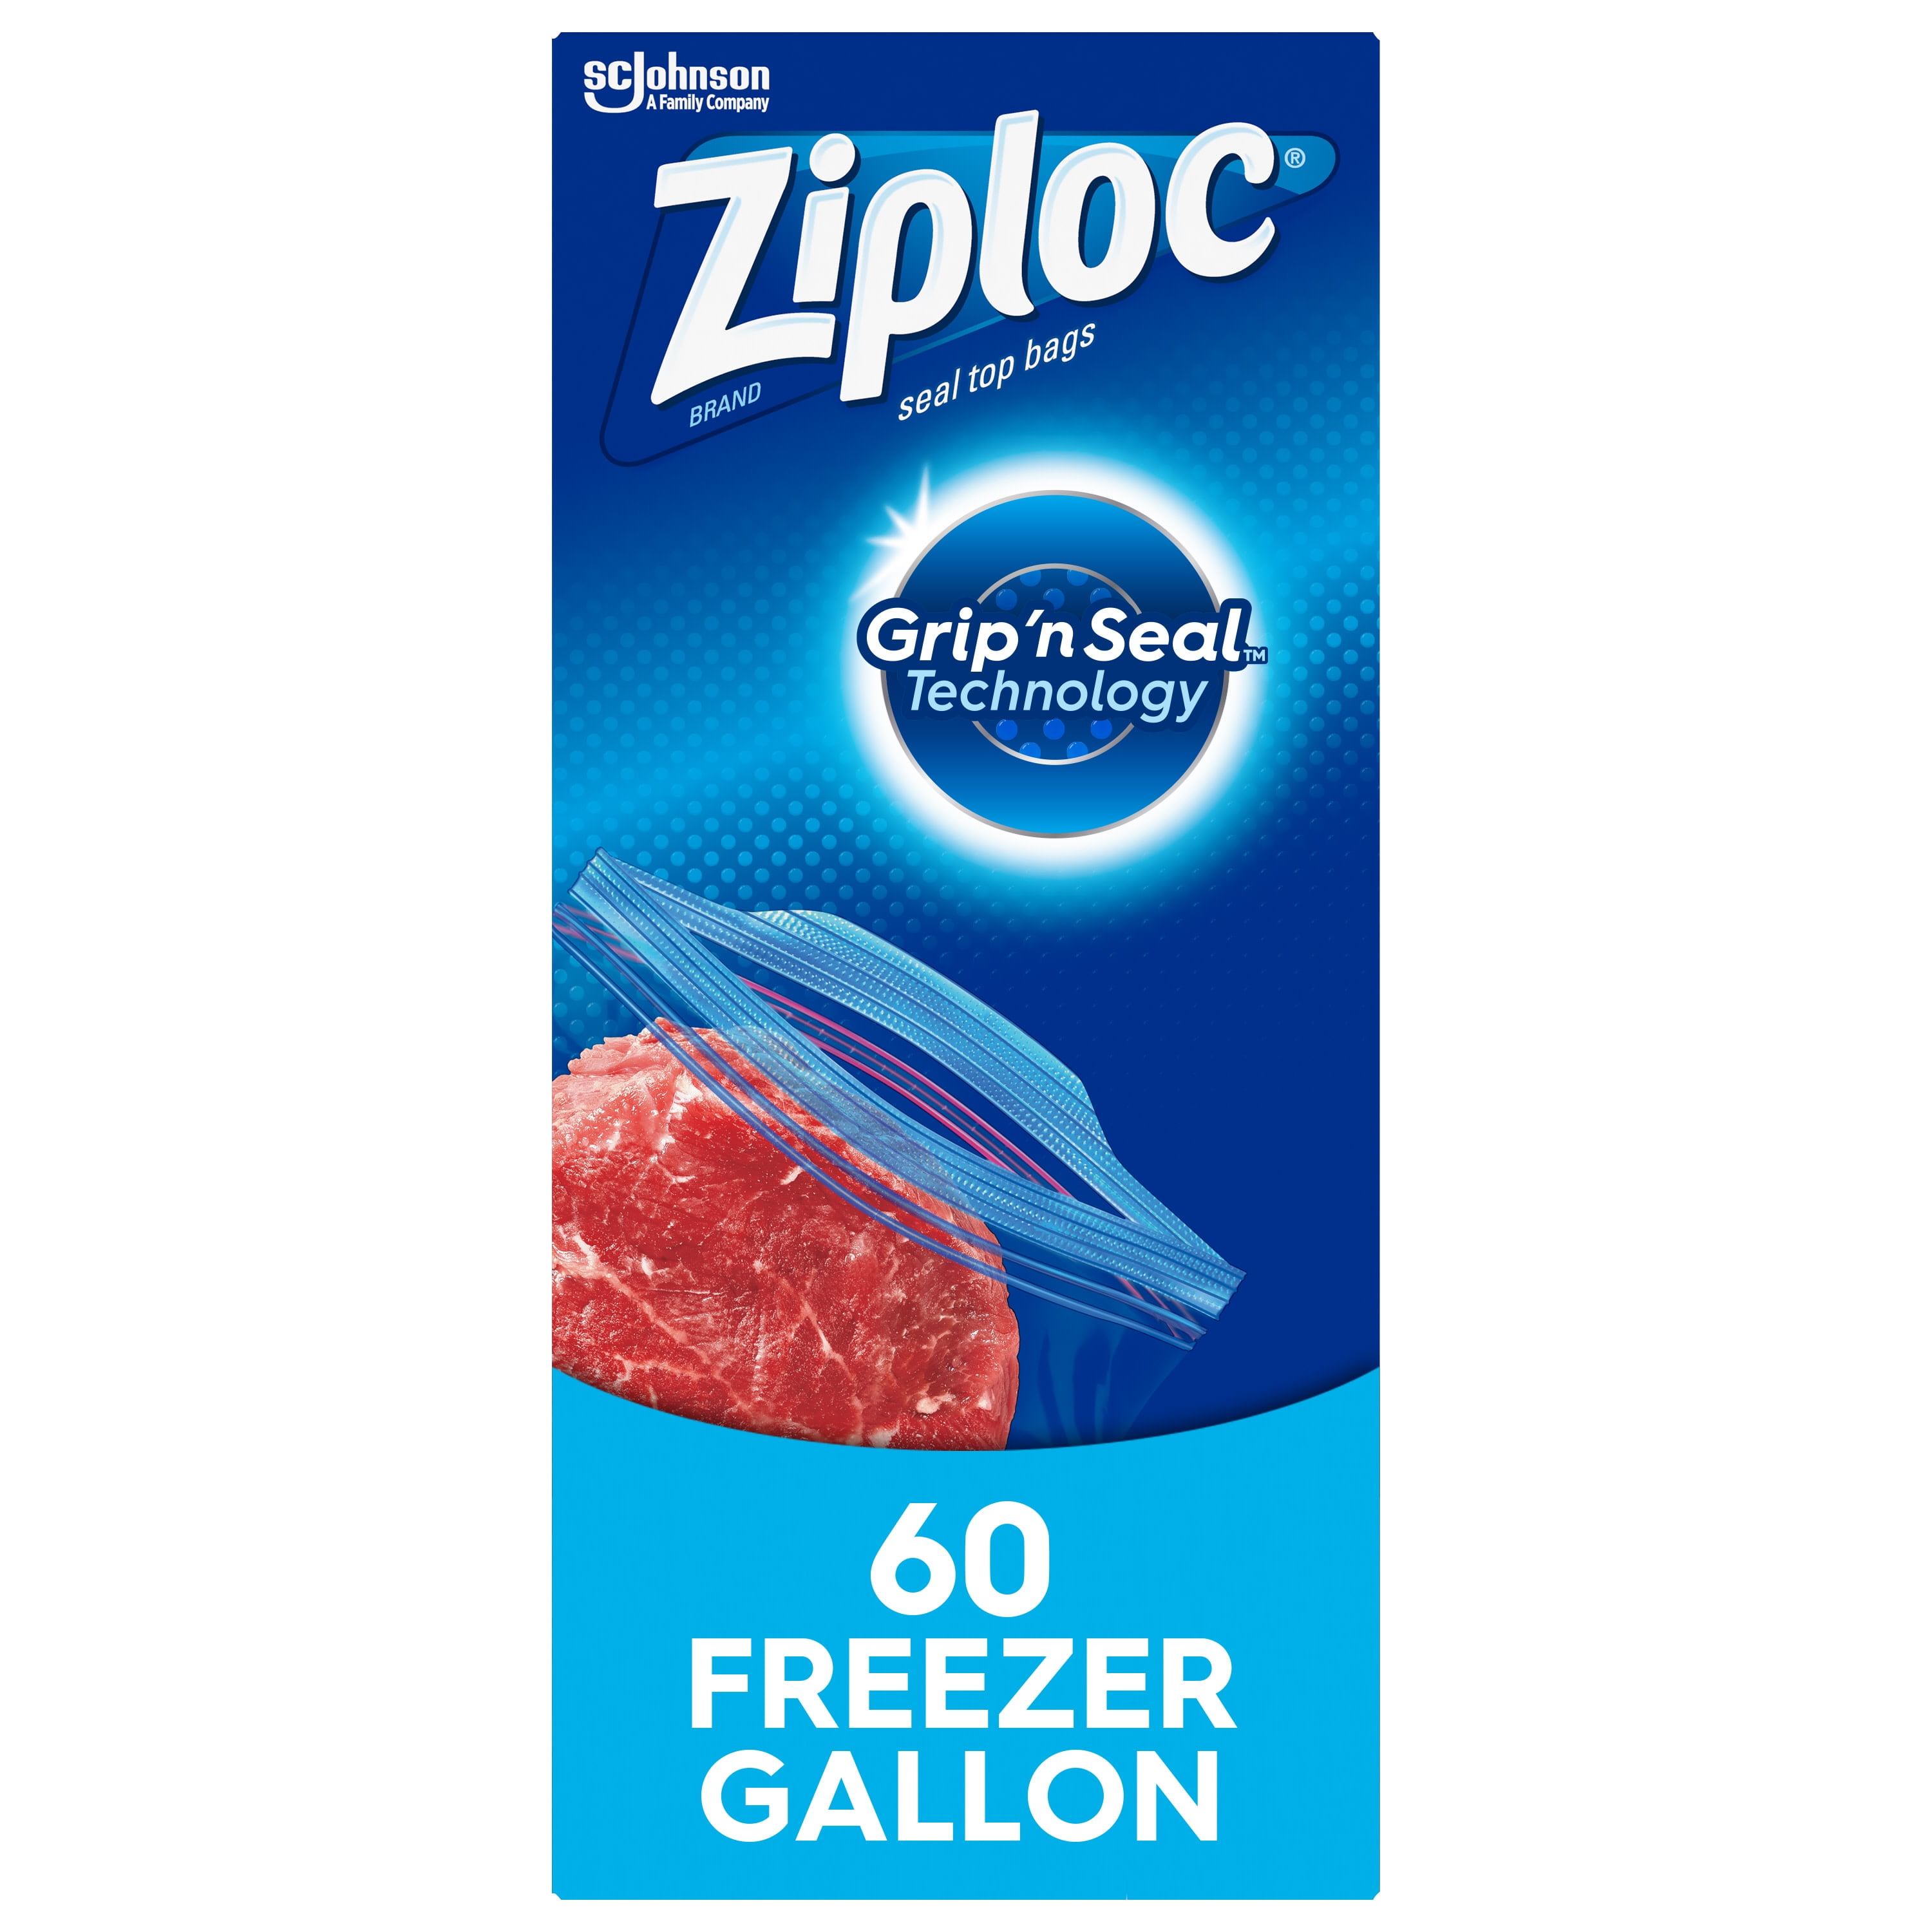 60 Count Gallon Ziploc Freezer Bags with New Grip 'n Seal Technology 